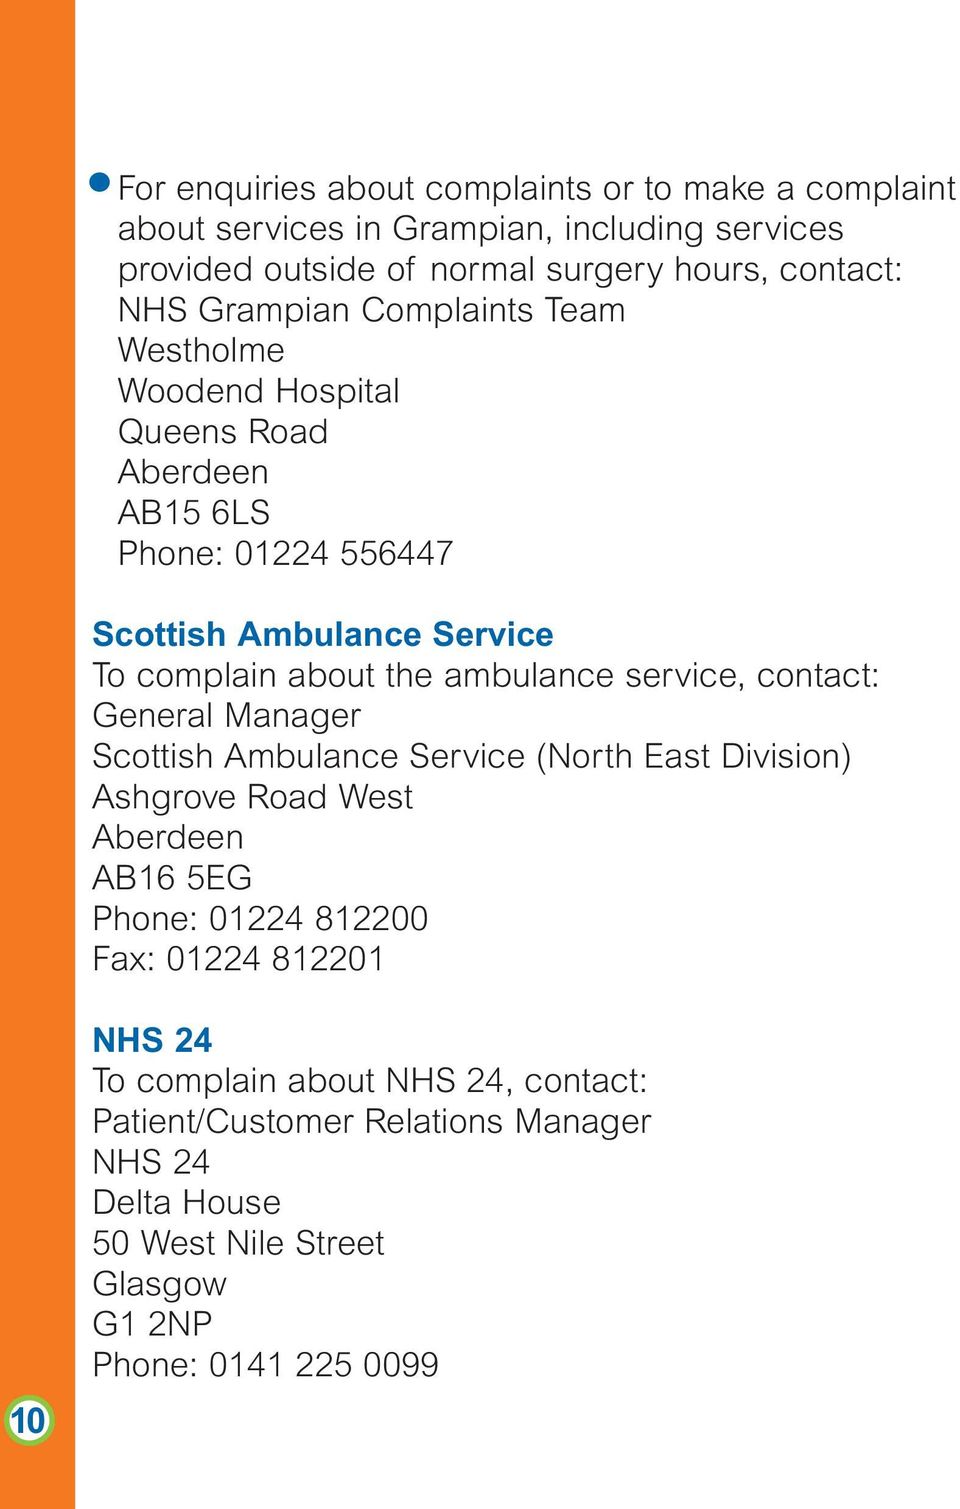 ambulance service, contact: General Manager Scottish Ambulance Service (North East Division) Ashgrove Road West Aberdeen AB16 5EG Phone: 01224 812200 Fax: